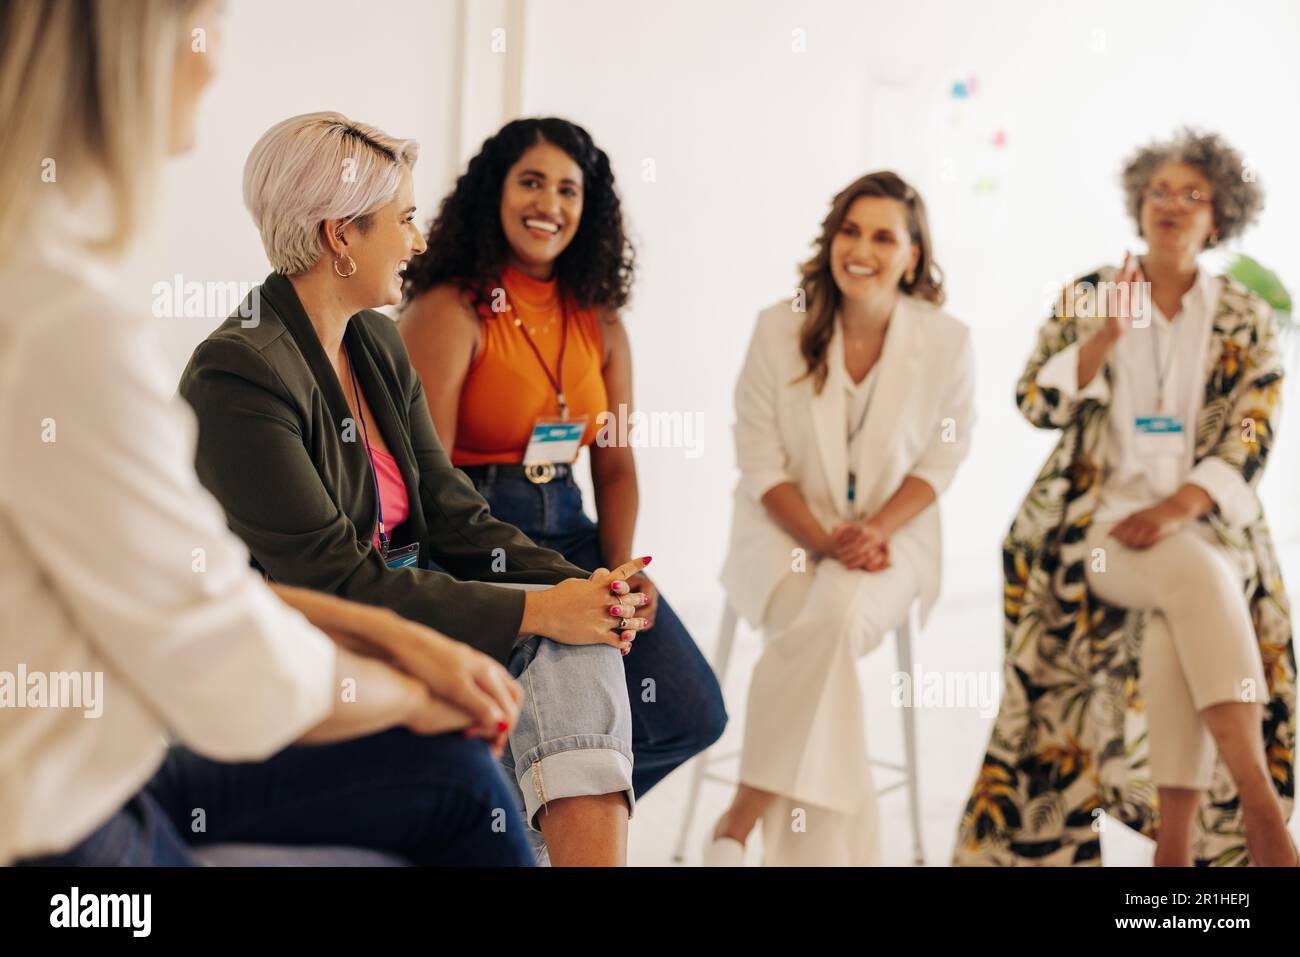 Cheerful businesswomen having a discussion during a conference meeting in a modern workplace. Group of multicultural businesswomen working together in Stock Photo